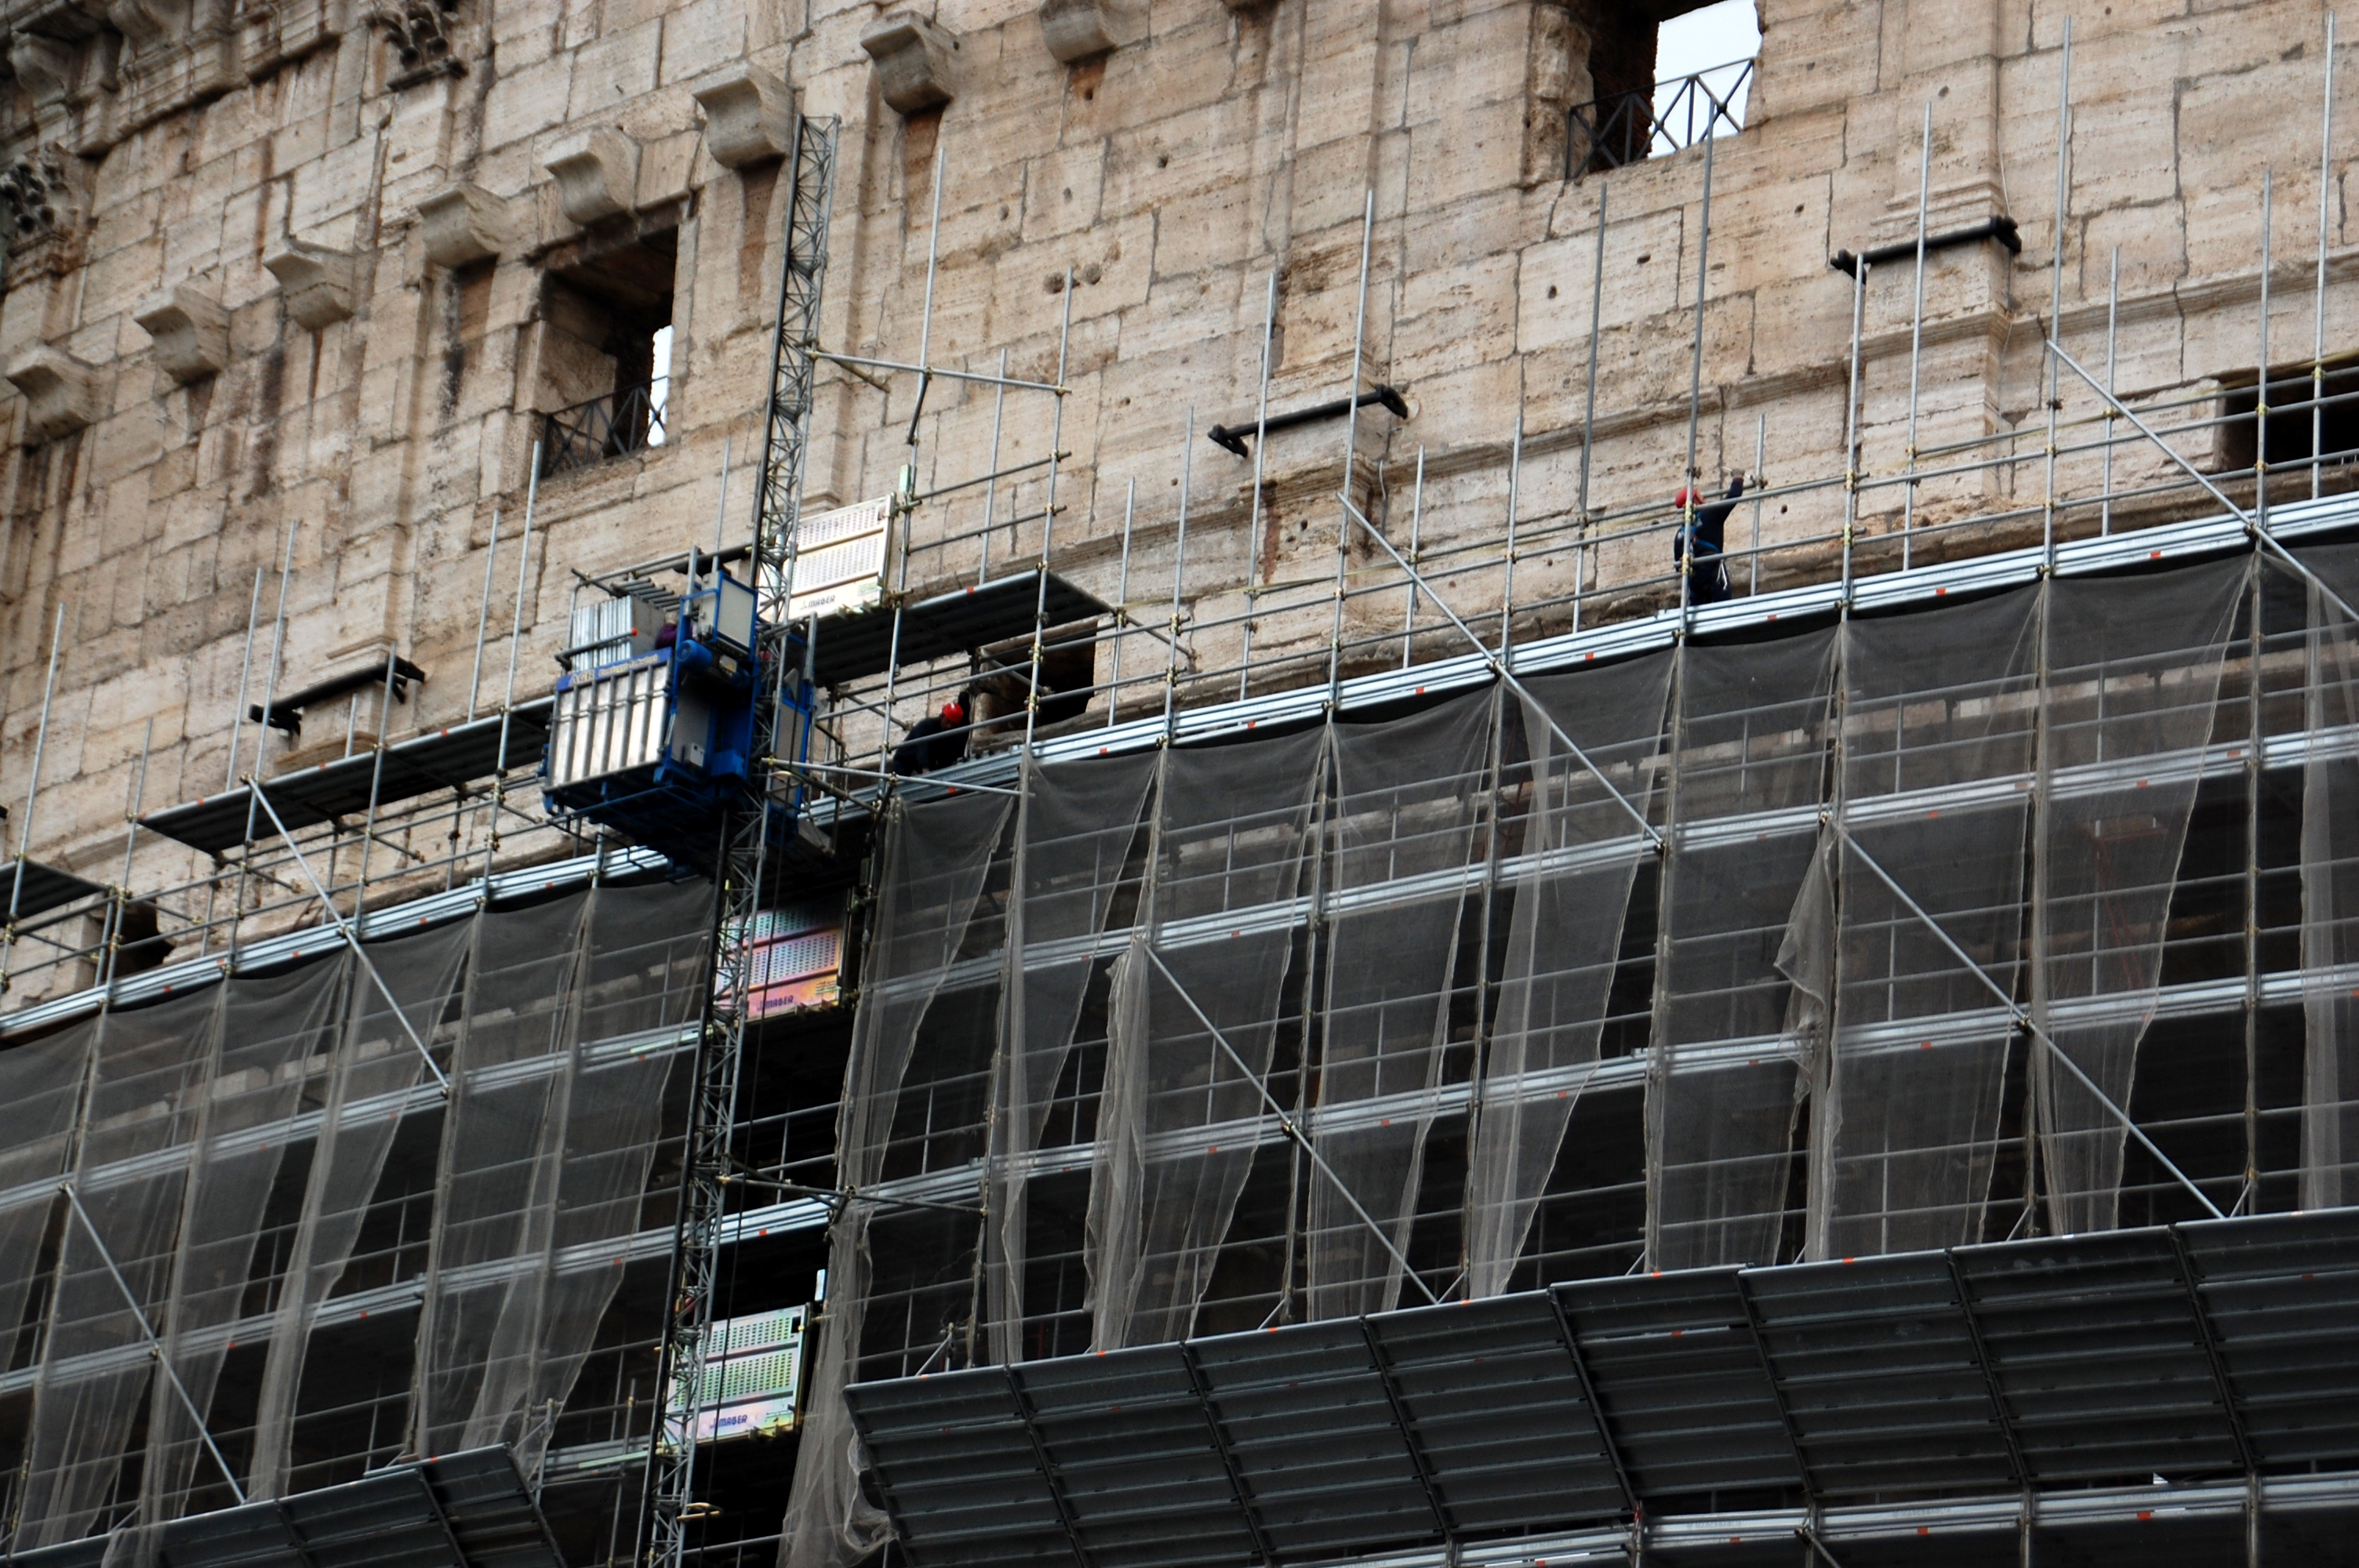 Restorations at the Colosseum